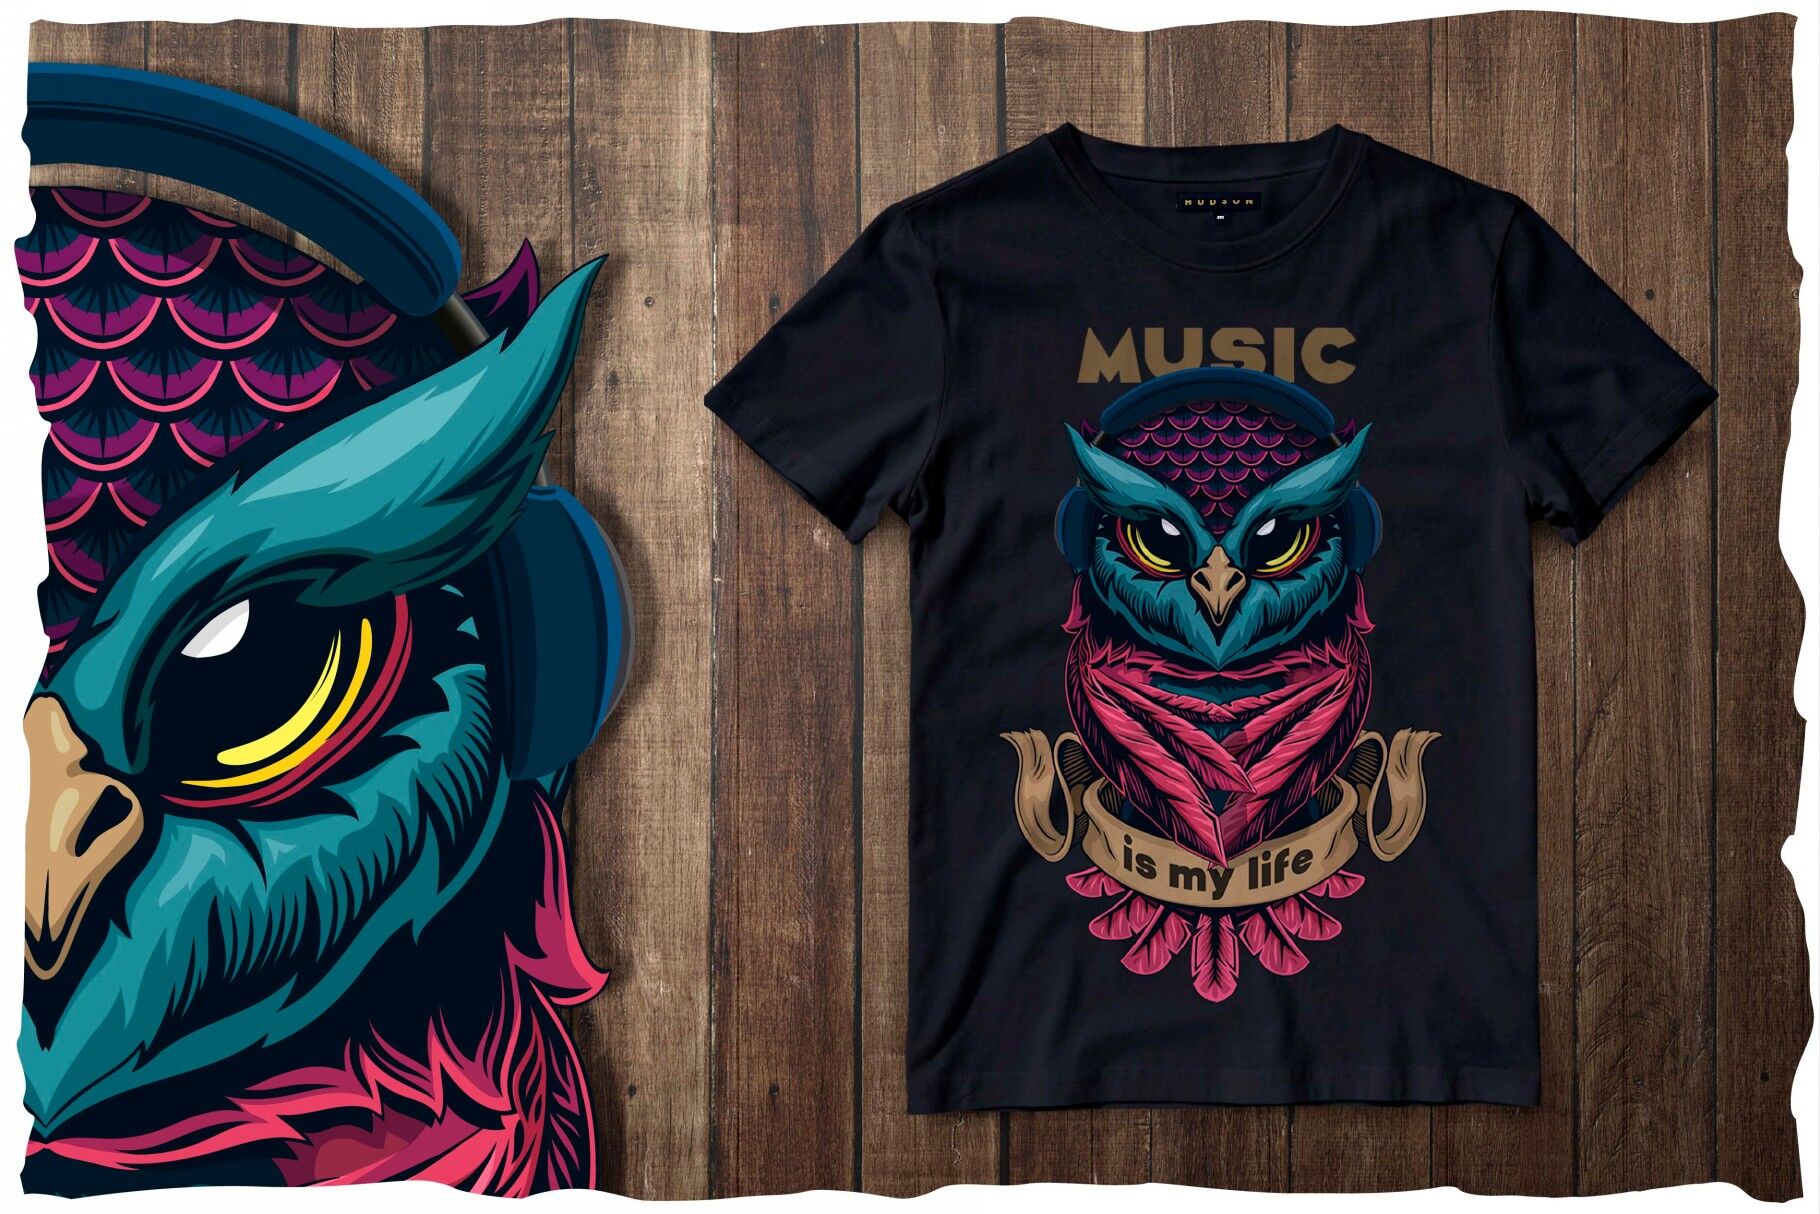 hypocrisy Steer bouquet Musical owl - T-shirt Design By Fractal Font Factory | TheHungryJPEG